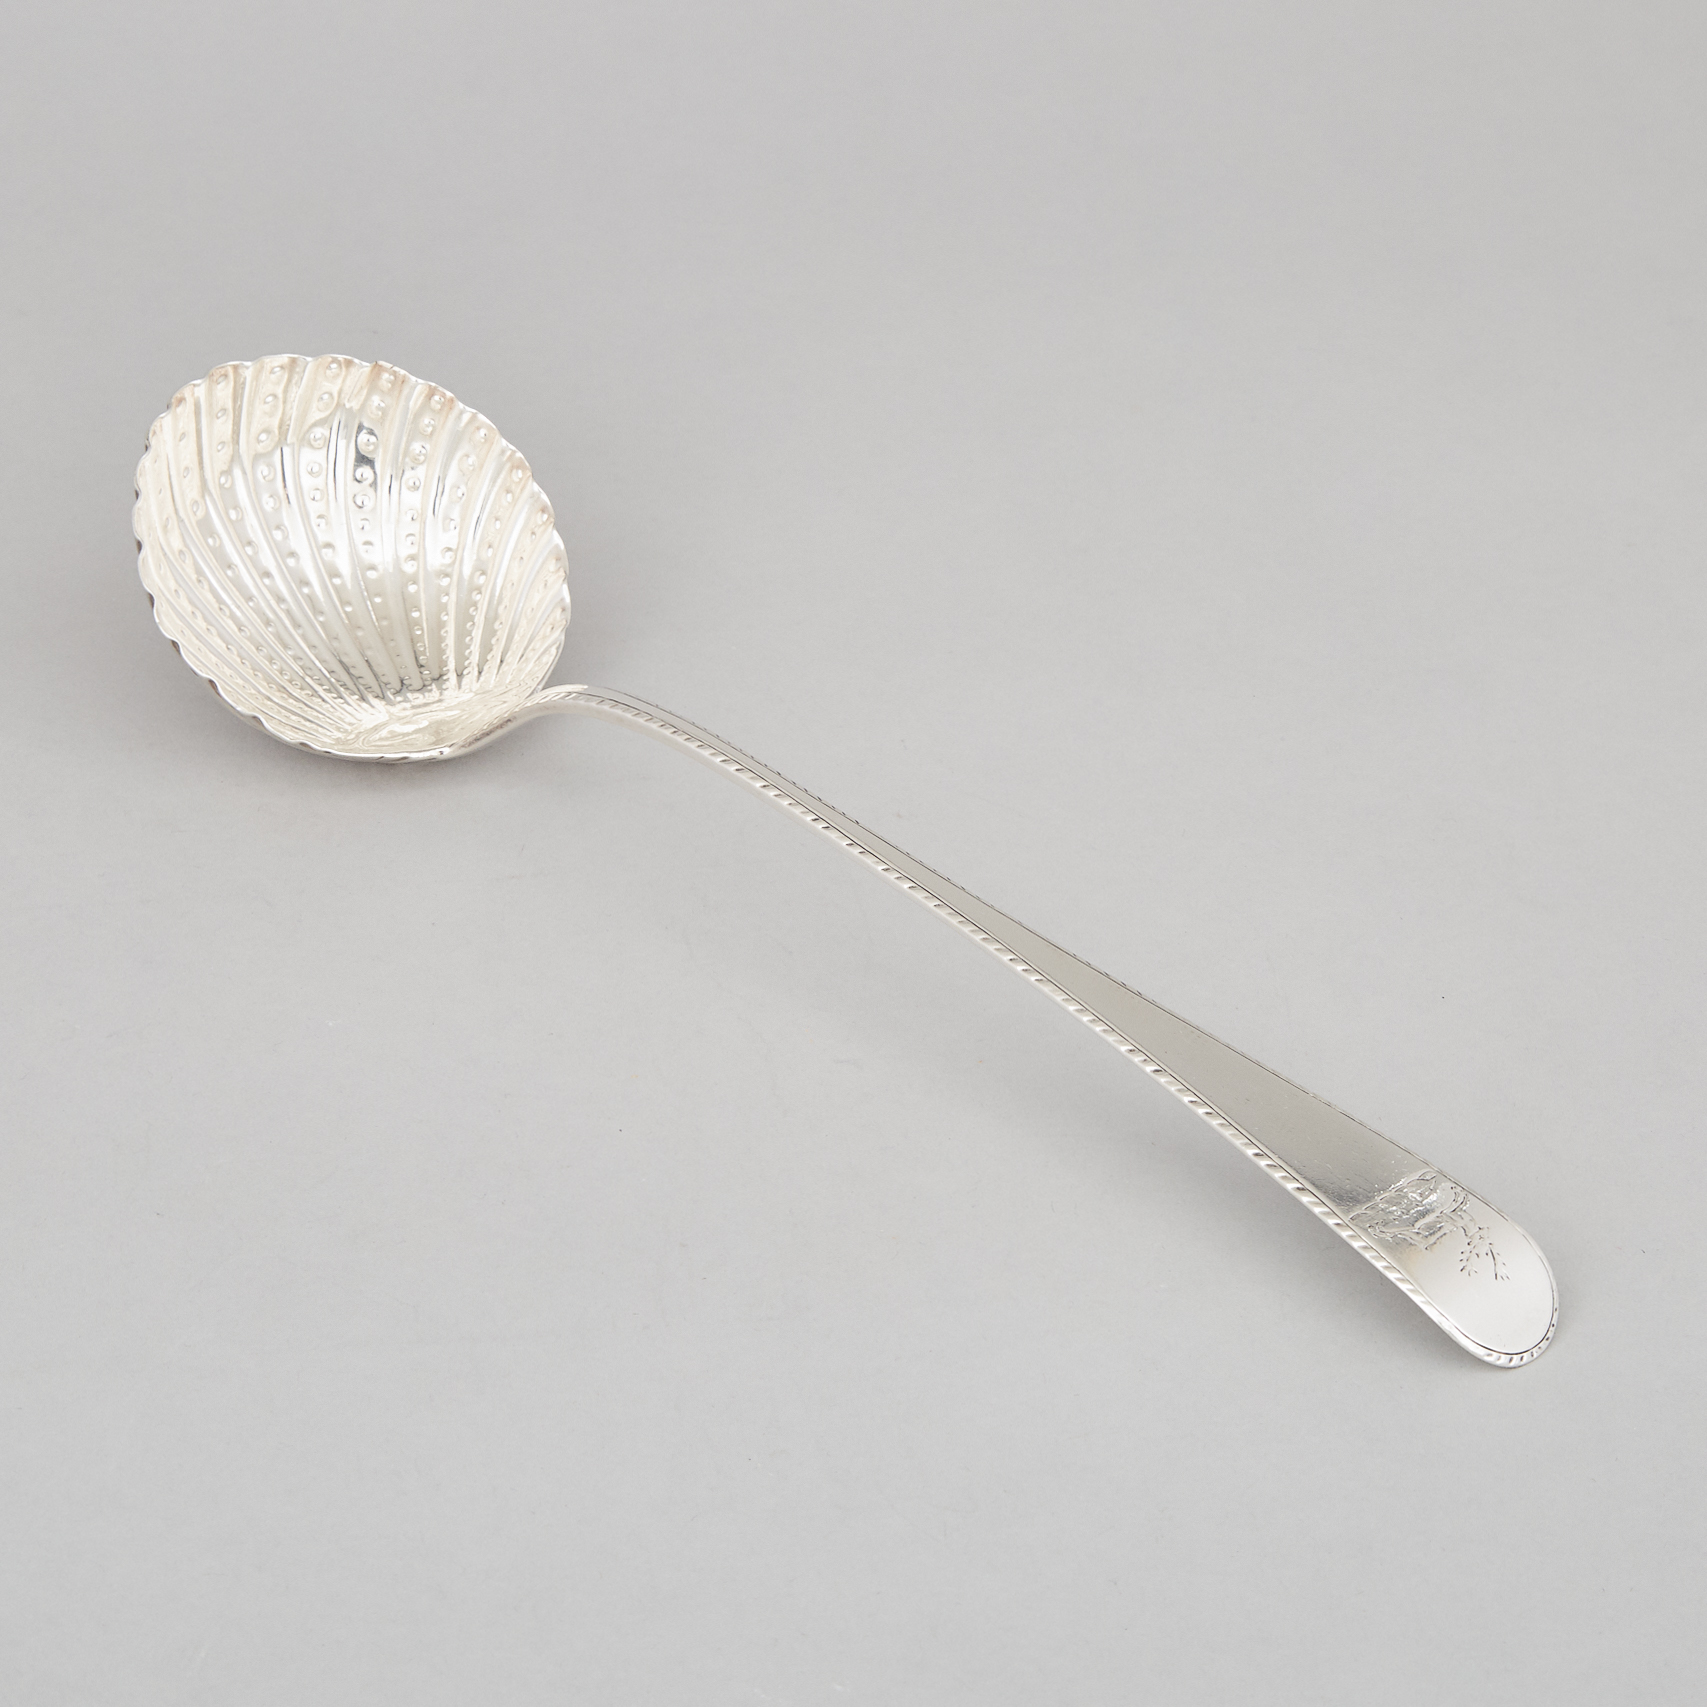 George III Silver Feather-Edged Old English Pattern Soup Ladle, Thomas Dene, London, 1766